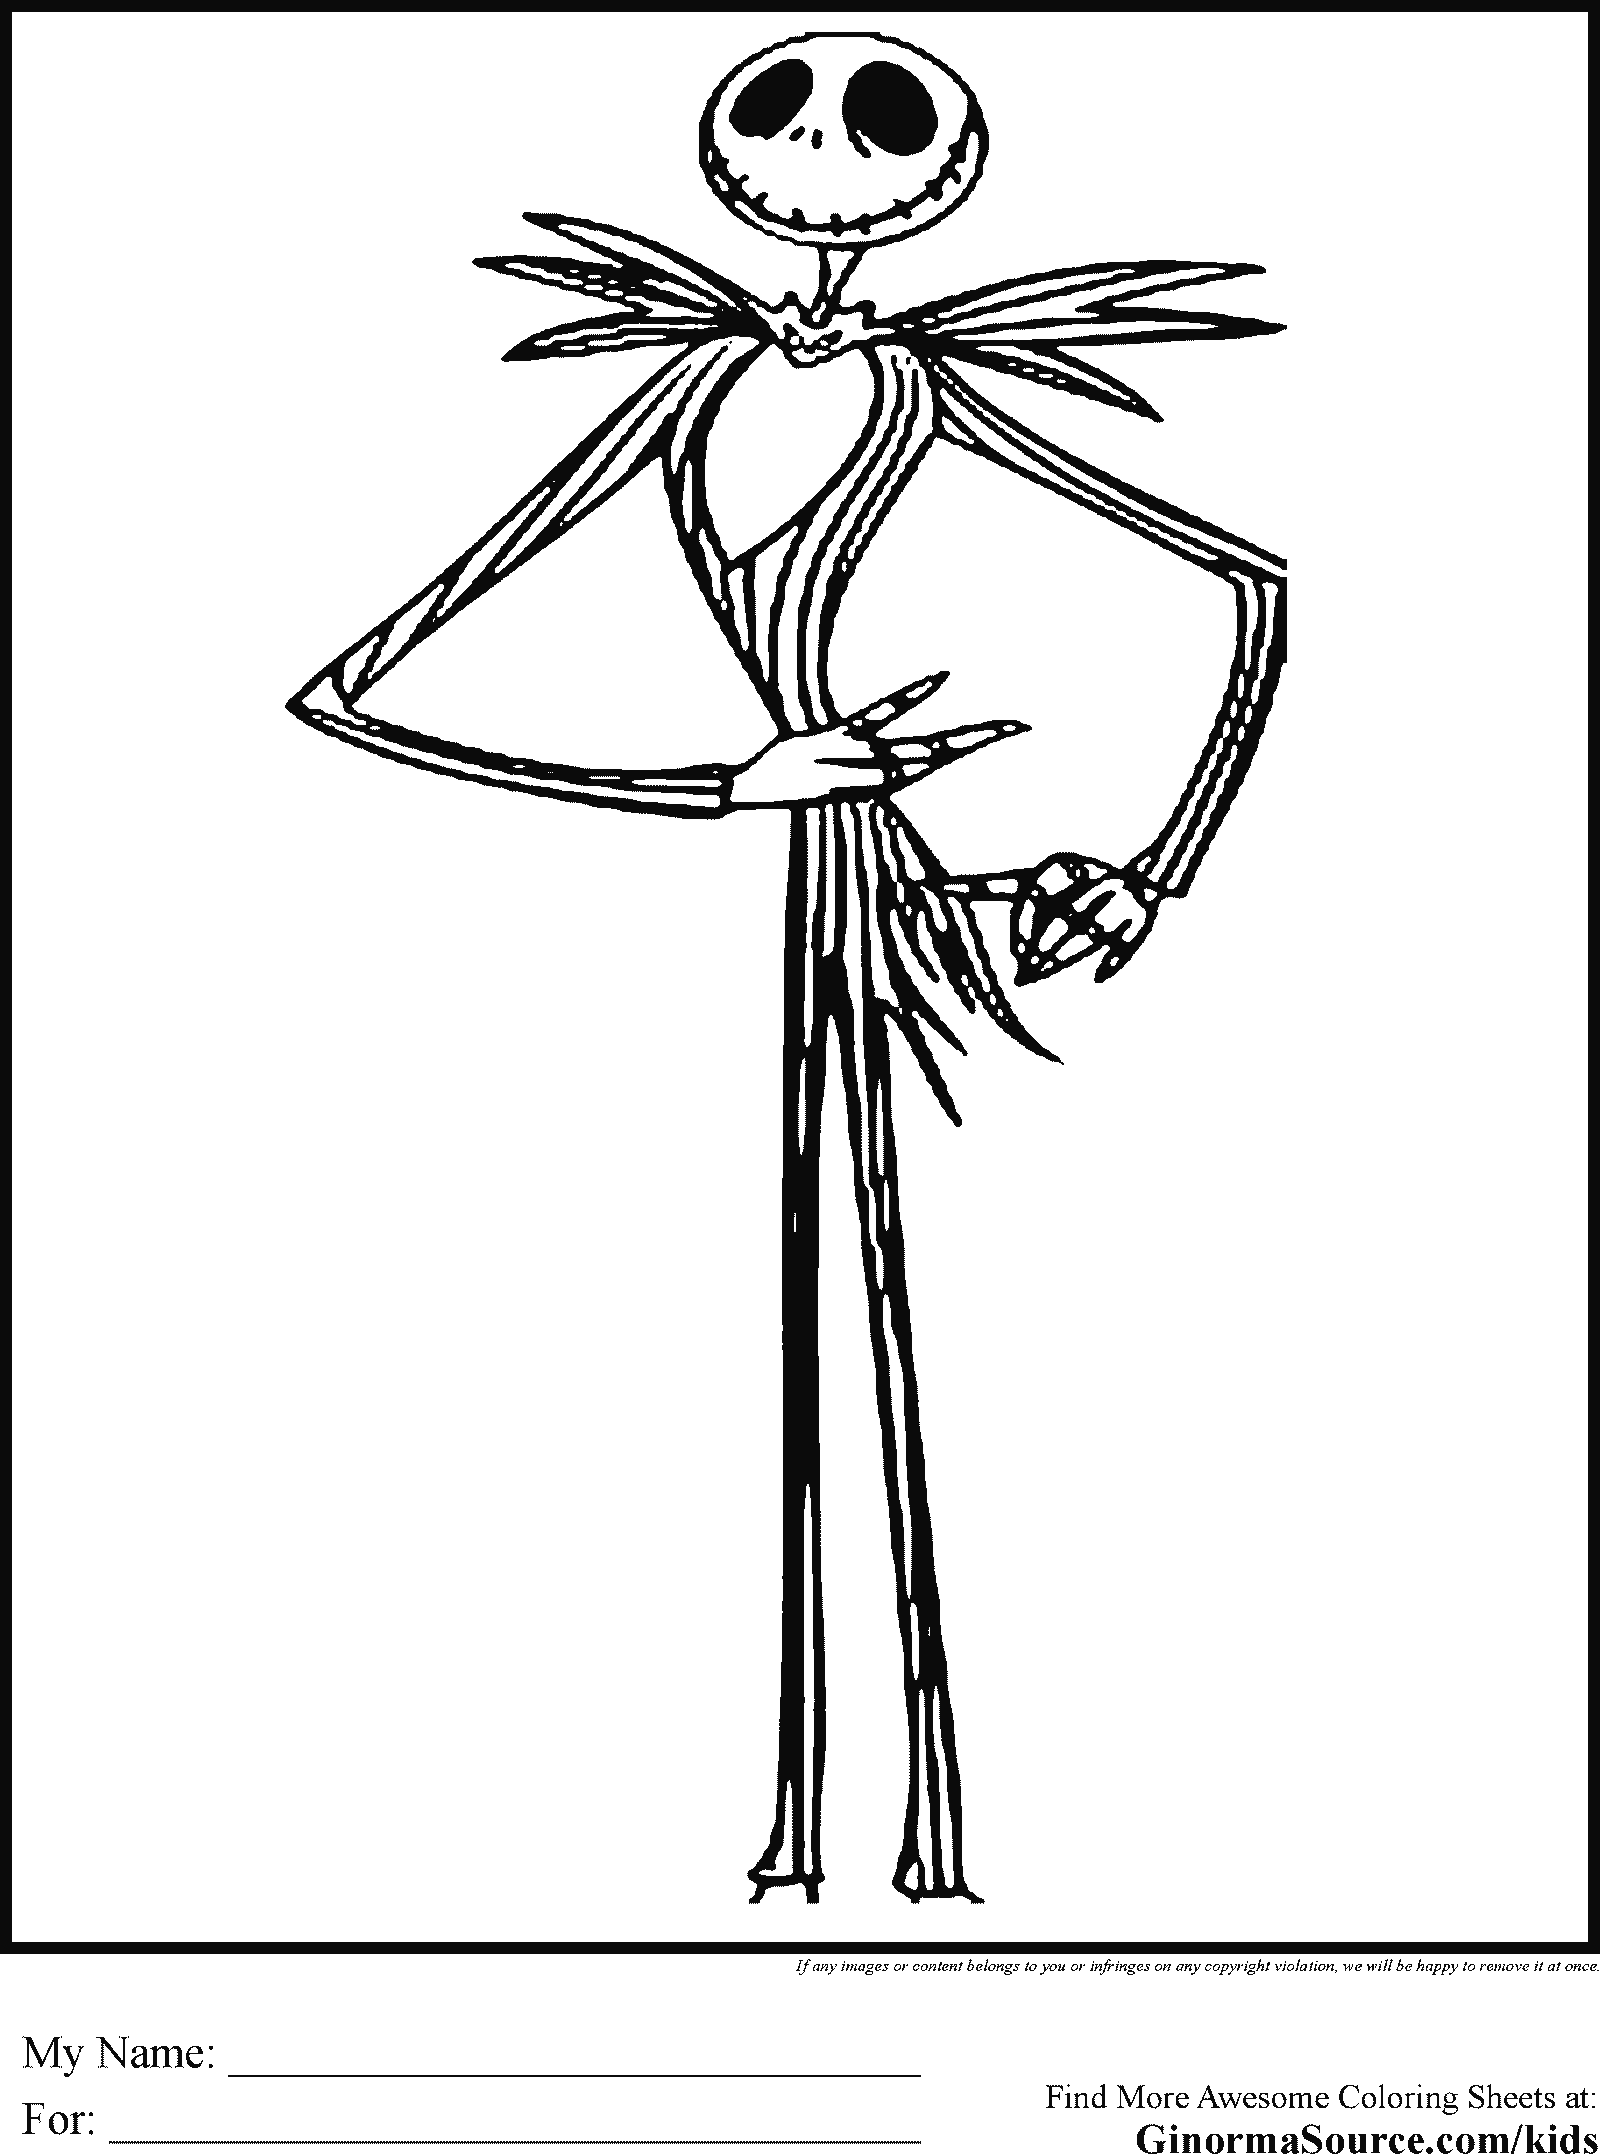 9 Iconic Jack Skellington Coloring Page from Nightmare Before